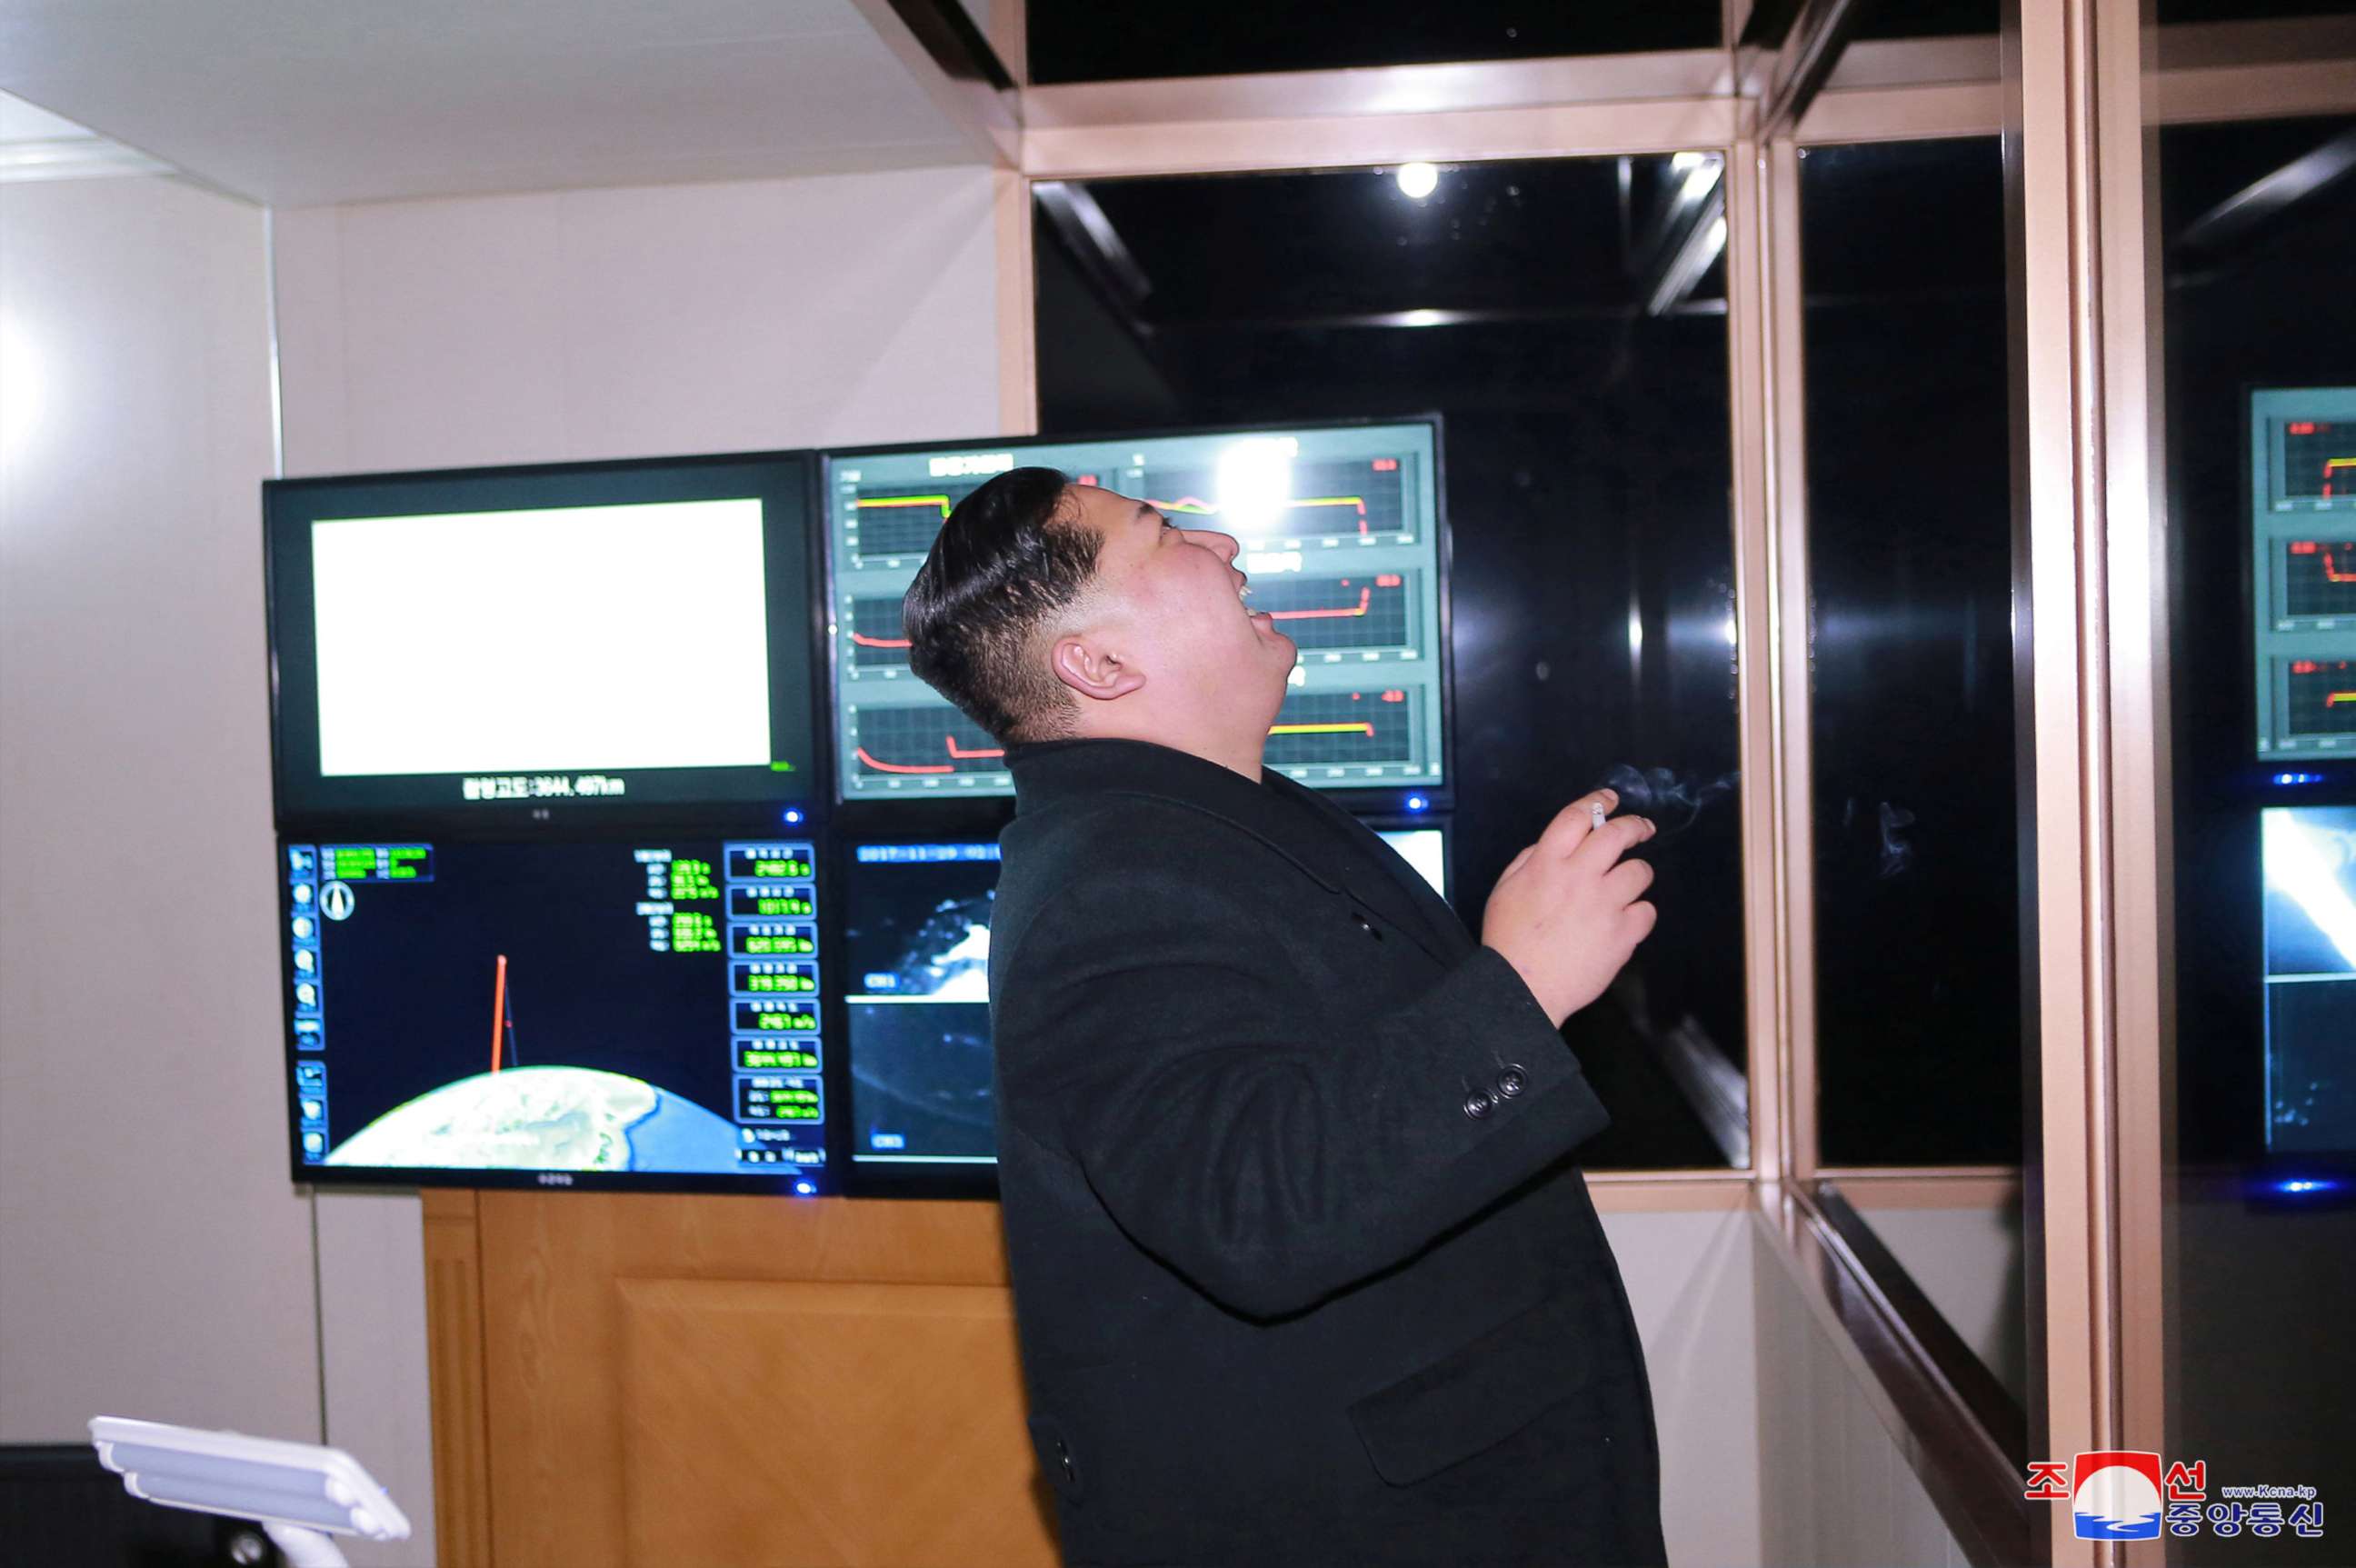 PHOTO: North Korea's leader Kim Jong Un is seen peering through a window in a photo released by North Korea's Korean Central News Agency on Nov. 30, 2017 after the successful test launch of a Hwasong-15 intercontinental ballistic rocket.